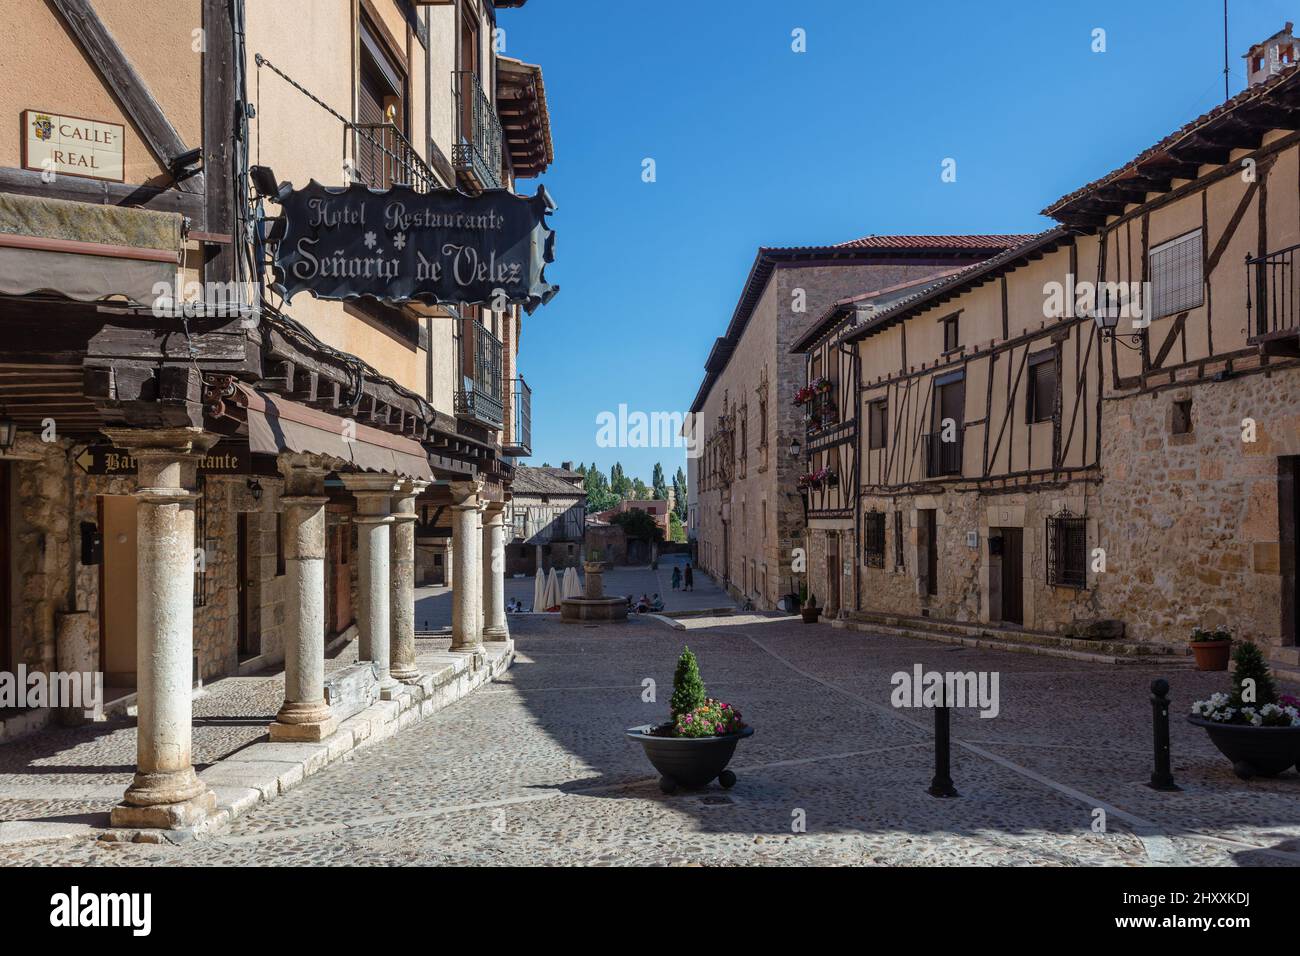 The medieval town of Pena Aranda de Duero, one of the most beautiful villages of Burgos, Spain. Stock Photo